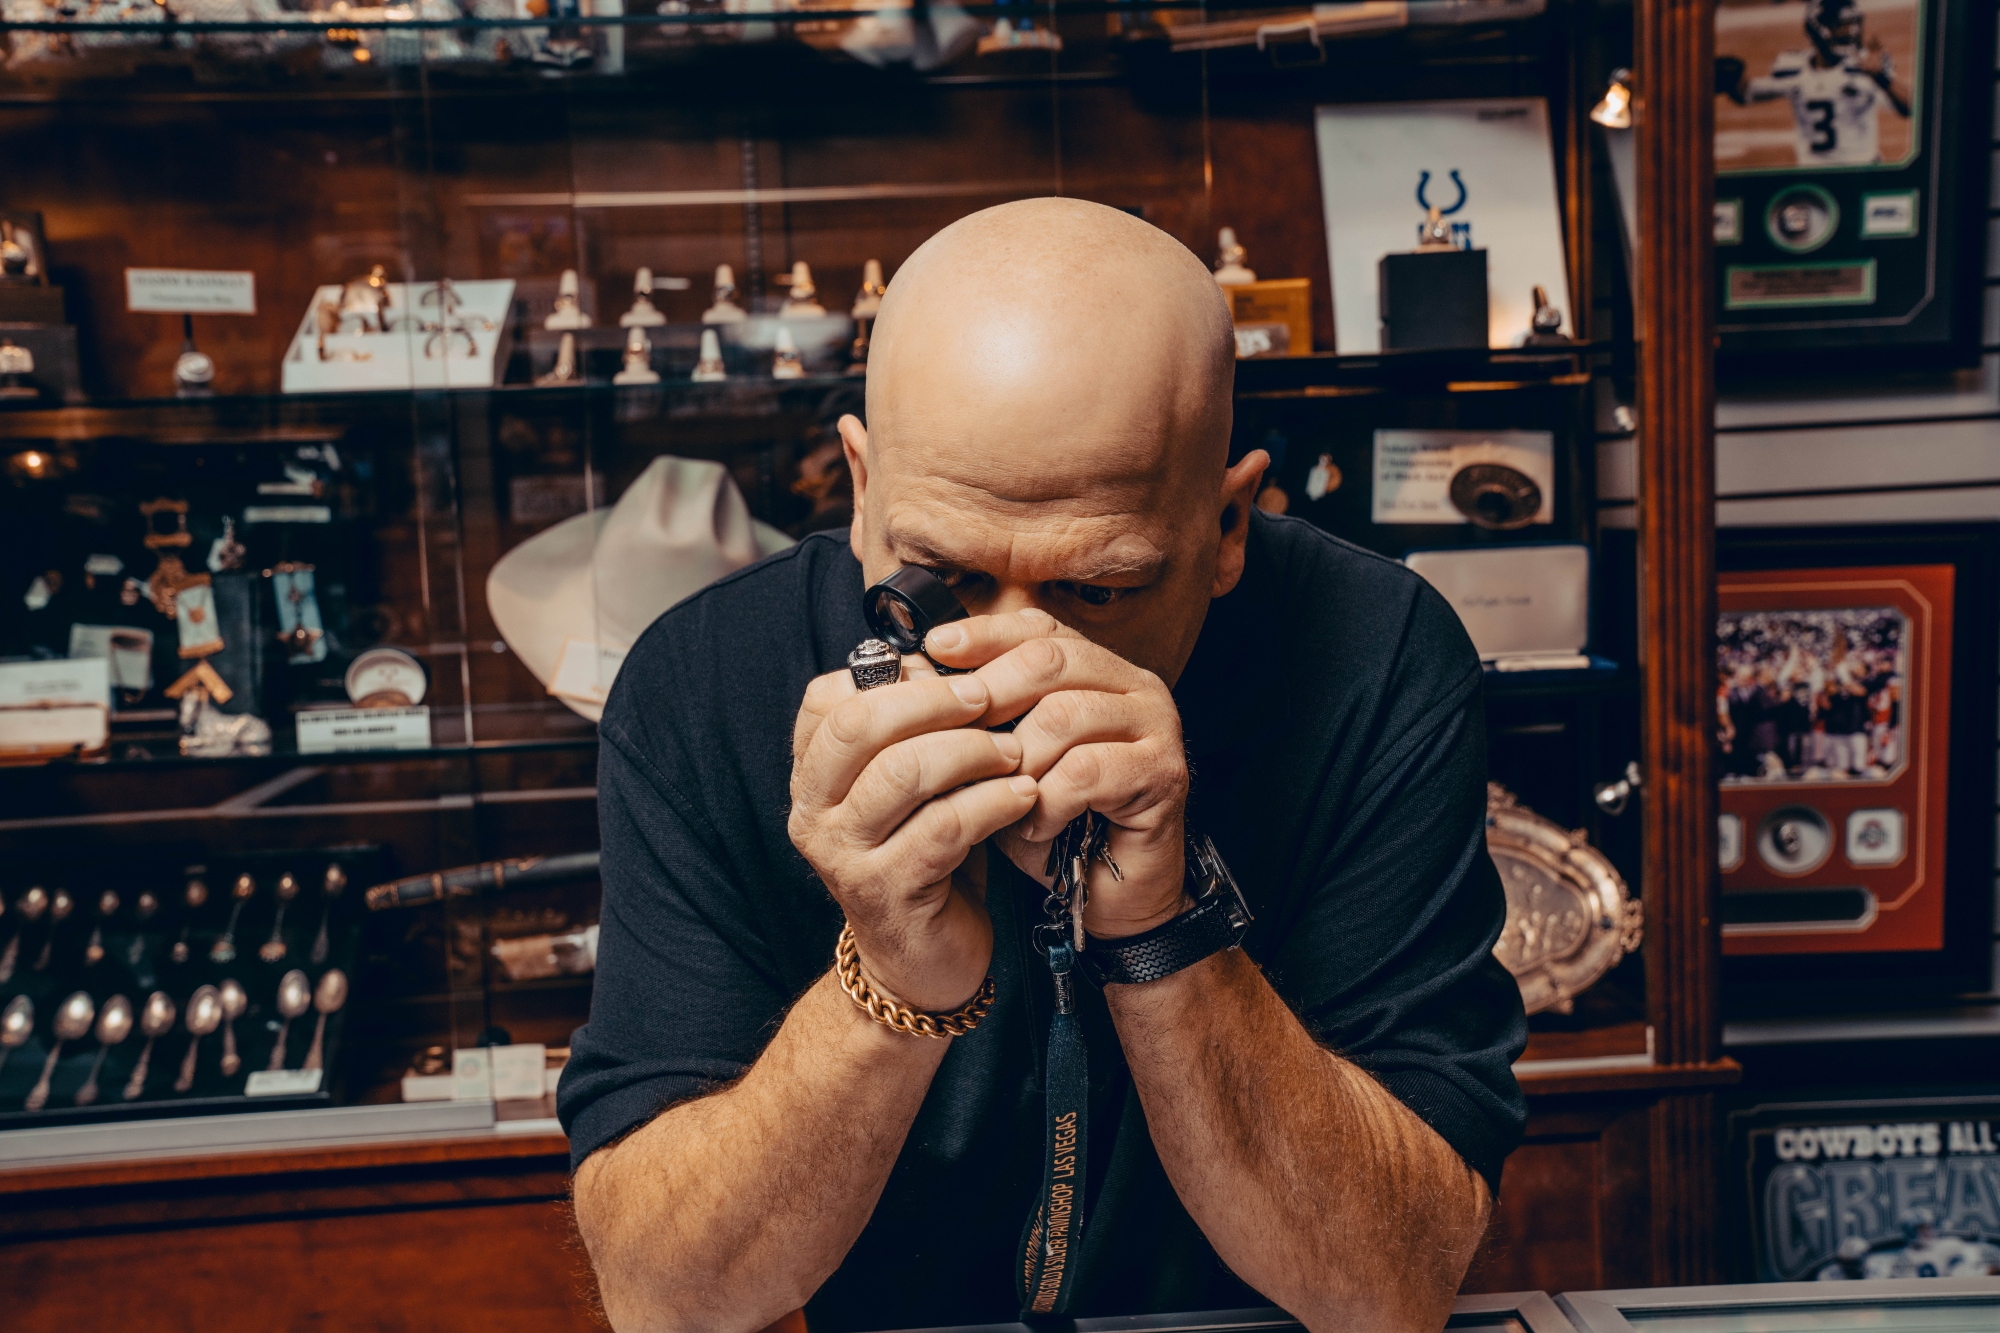 'Pawn Stars' Rick Harrison with his elbows resting on a table looking at an item with an eyeglass